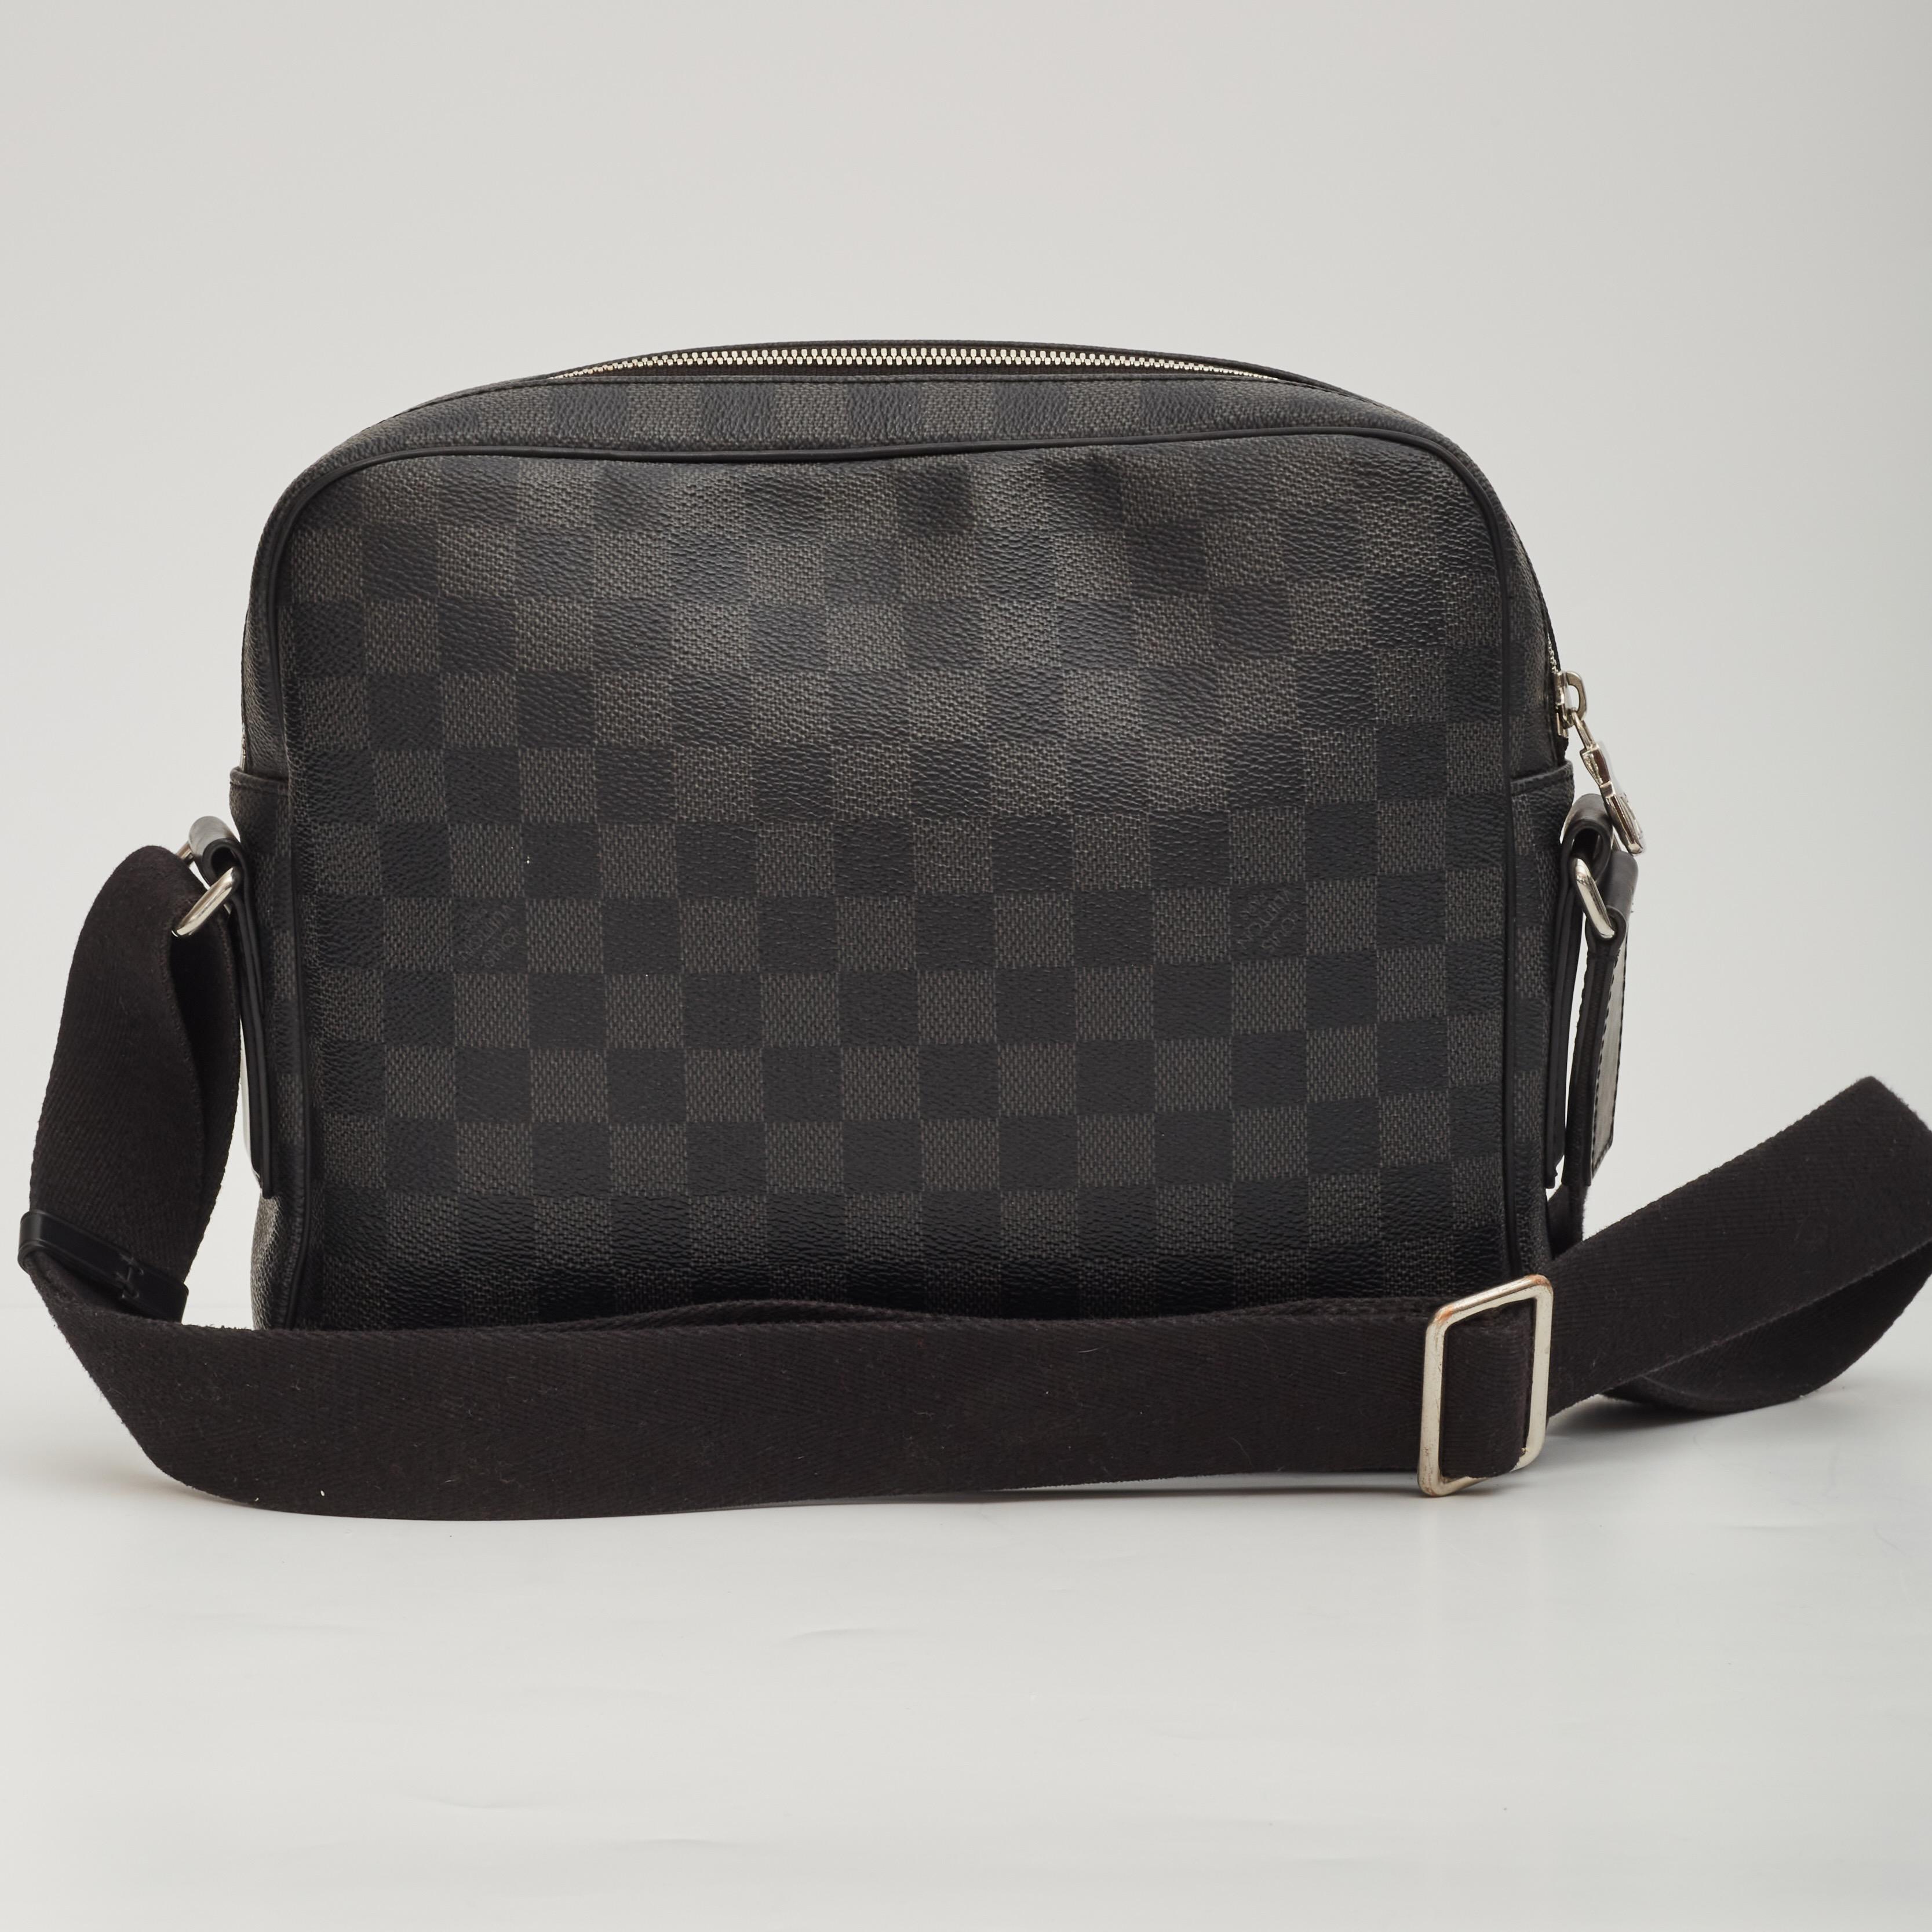 This messenger bag is made of Louis Vuitton signature Damier Graphite checkerd coated canvas. The bag features black leather trim, a woven fabric adjustable shoulder strap, silver tone hardware and a front zipper pocket. The top zippers open to a